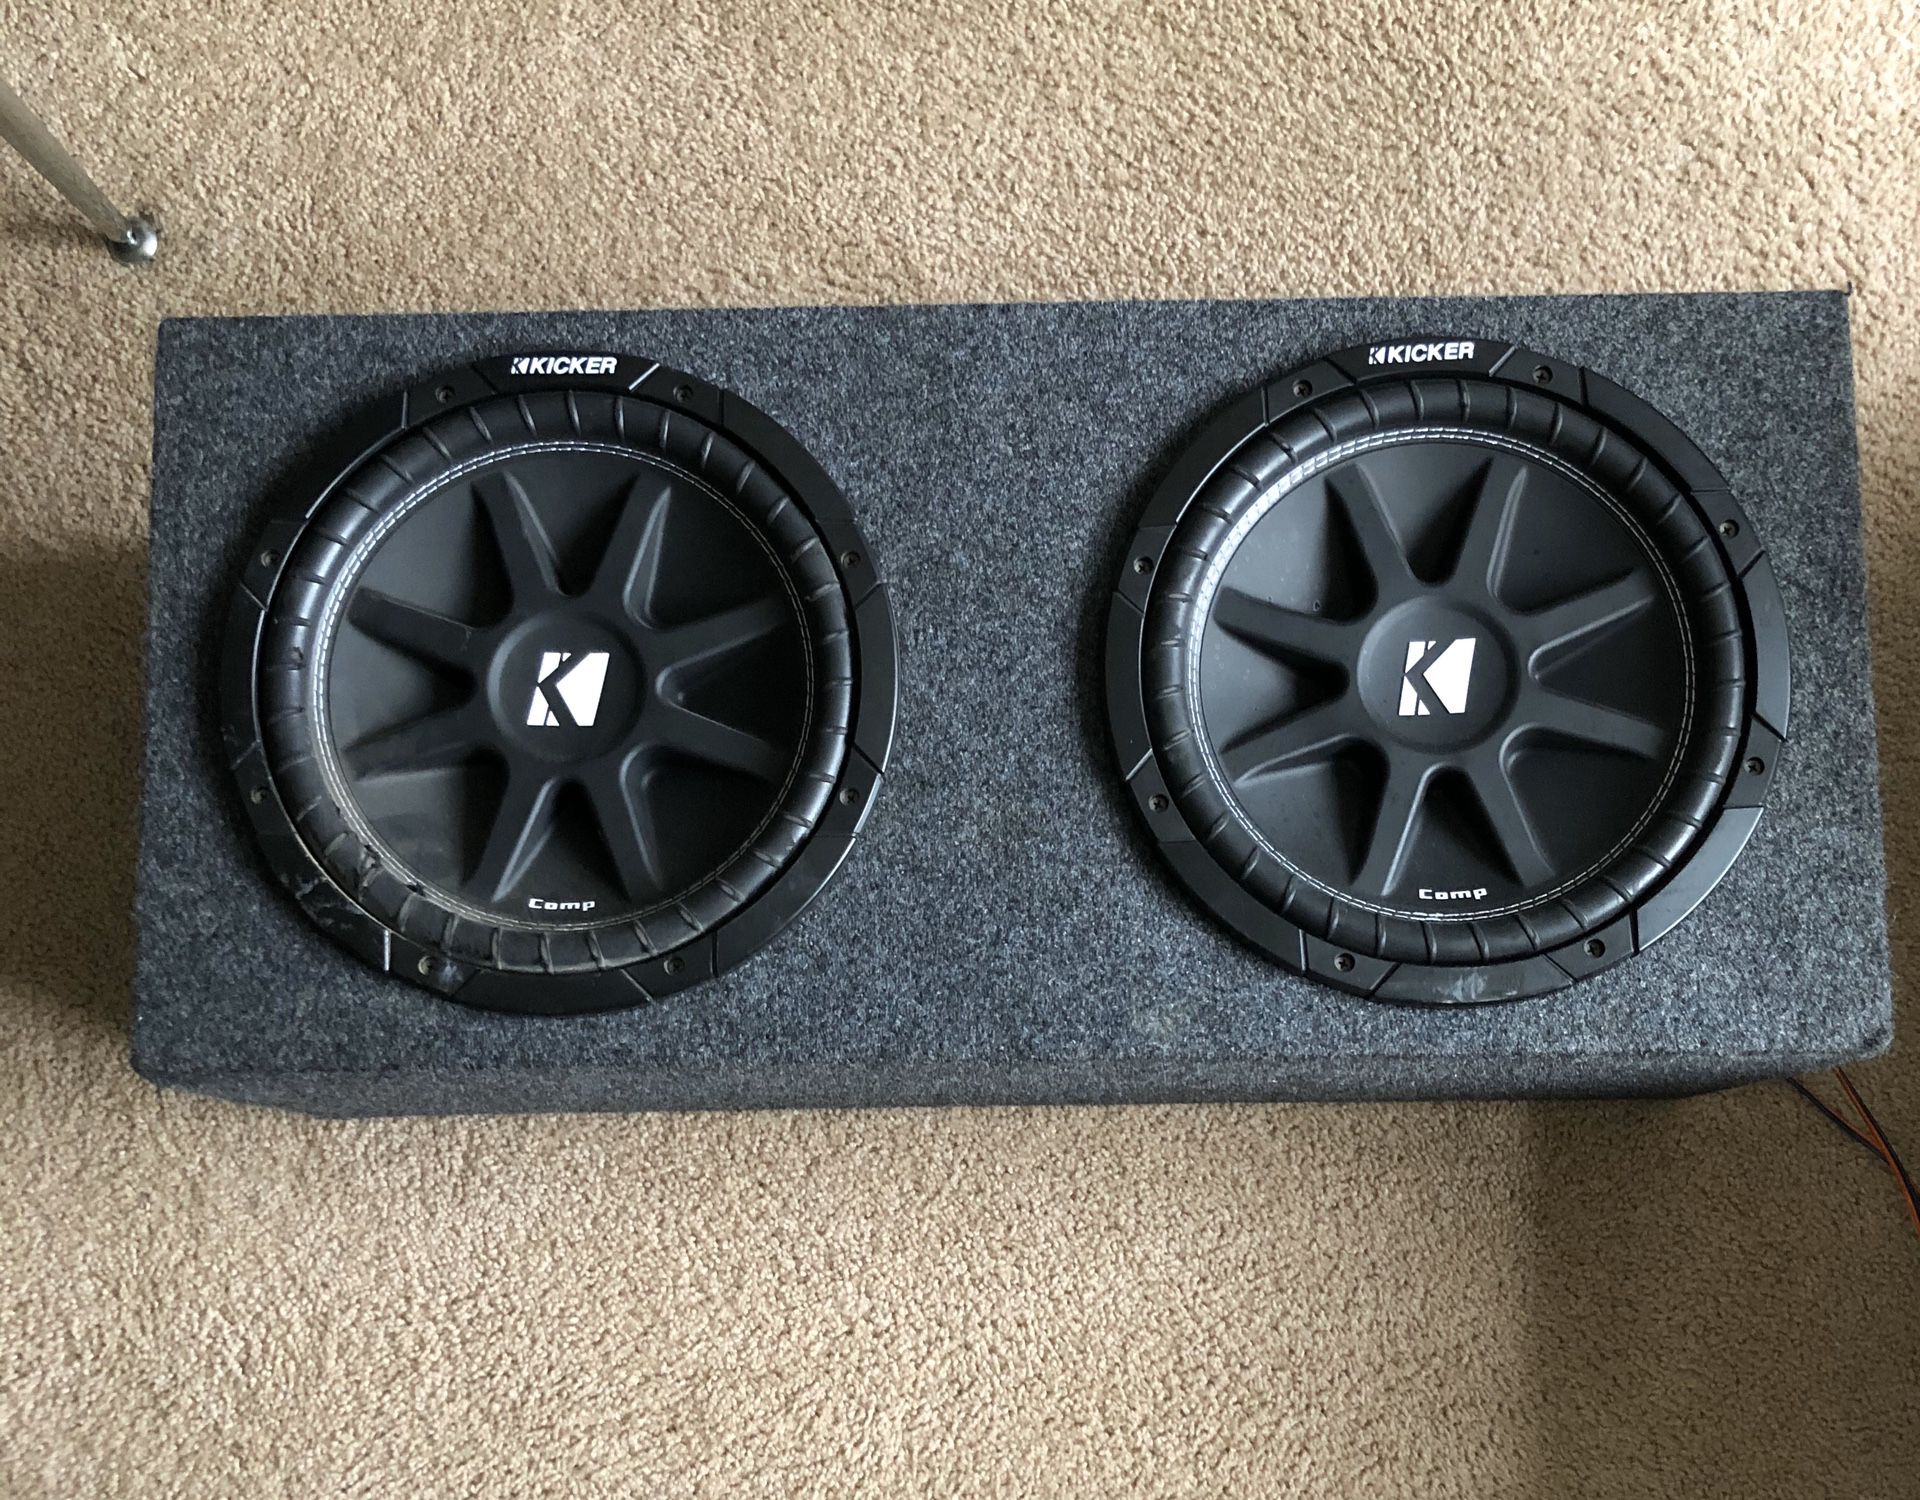 Kicker subwoofers with amp